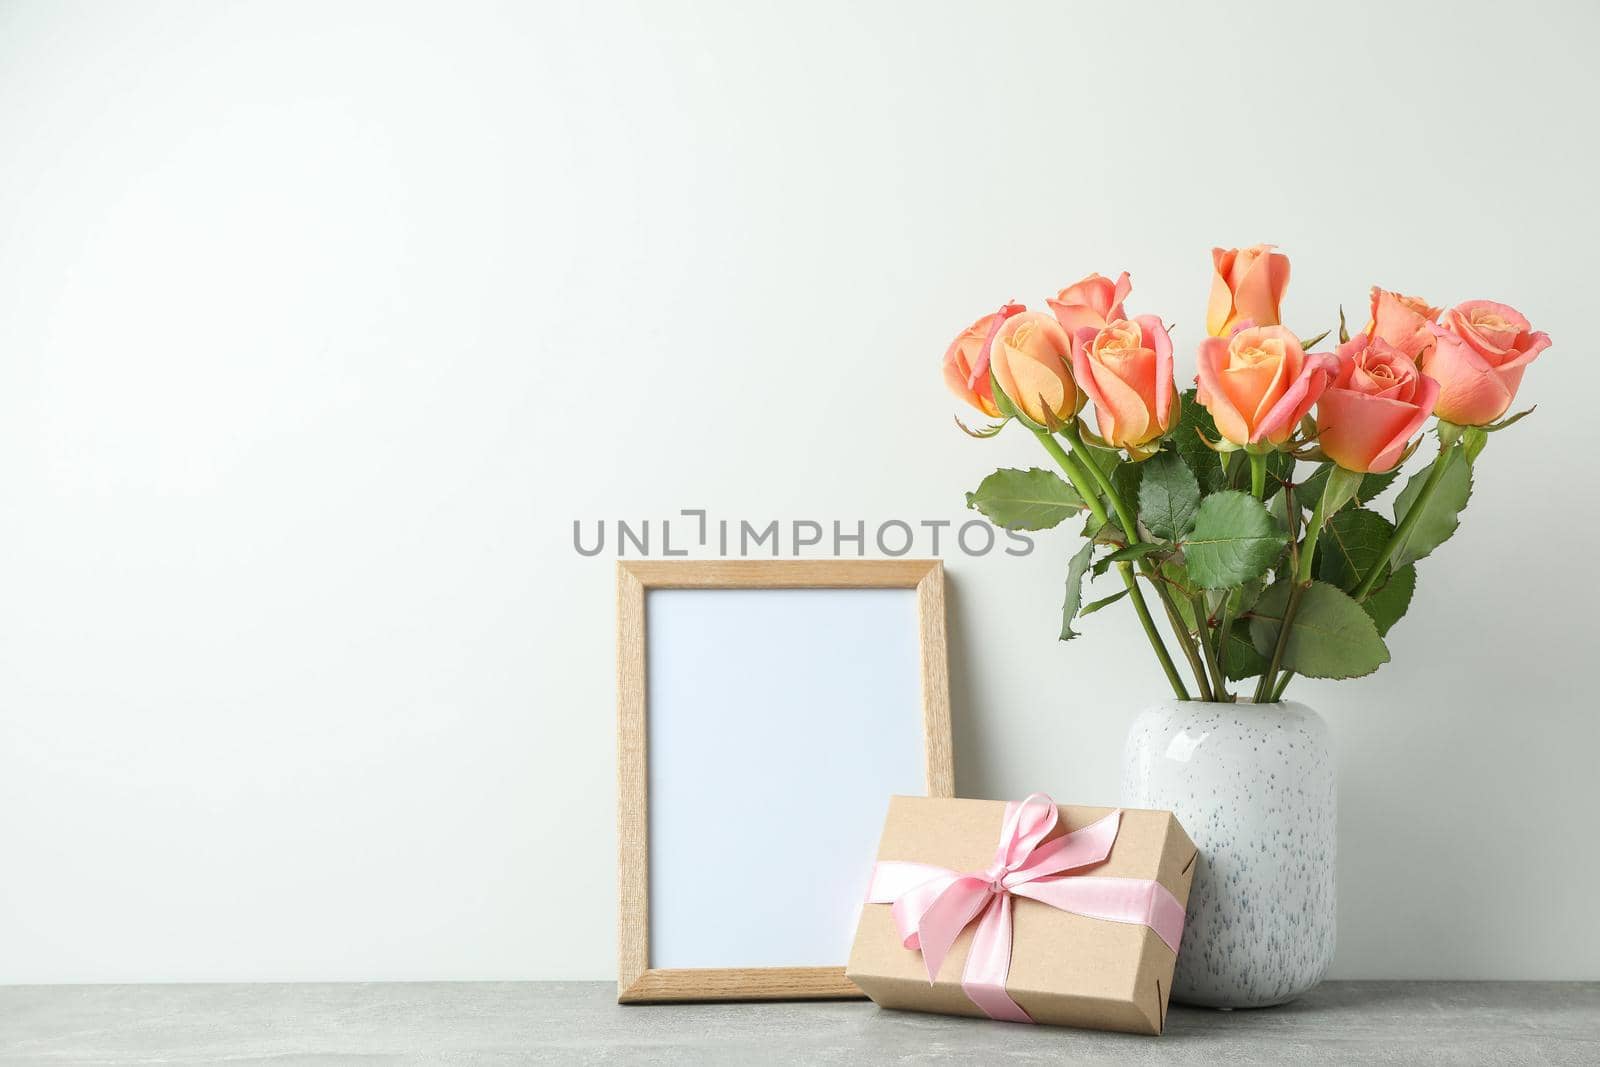 Vase with roses, gift and empty frame on grey table against white background, space for text